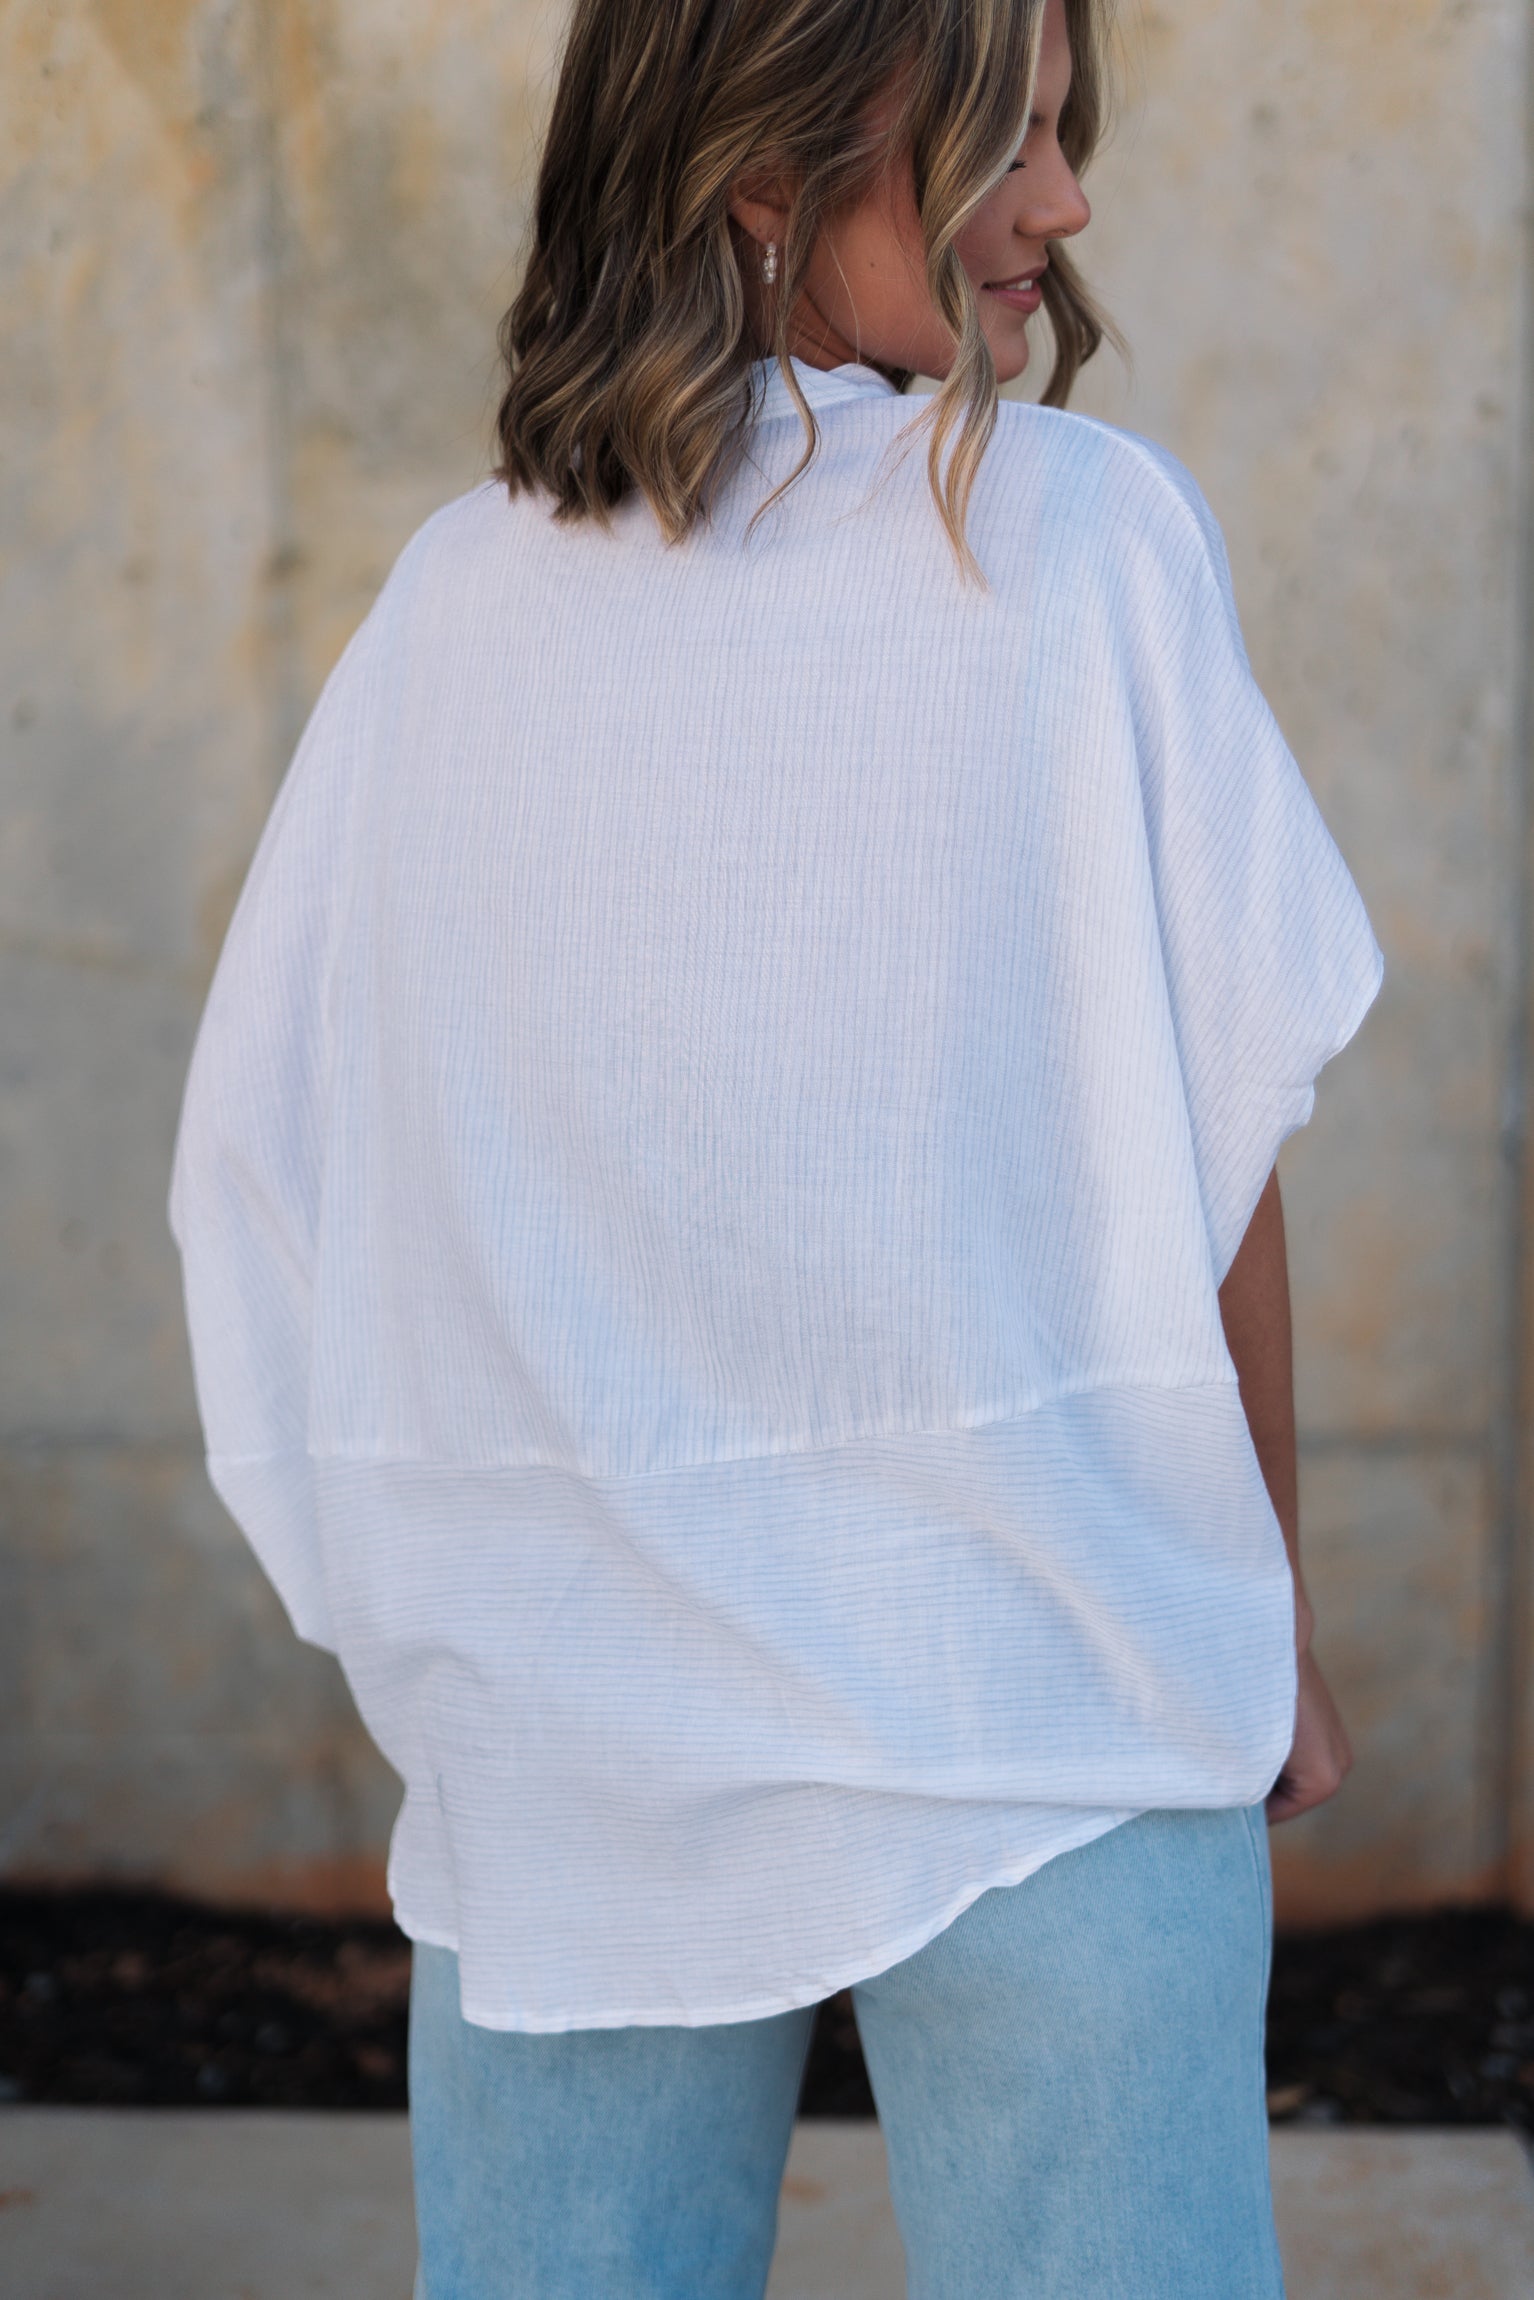 Back view of female model wearing the Thea White Lightweight Top that has lightweight white fabric with subtle monochrome stripes, oversized fit, v neckline, and short batwing sleeves.